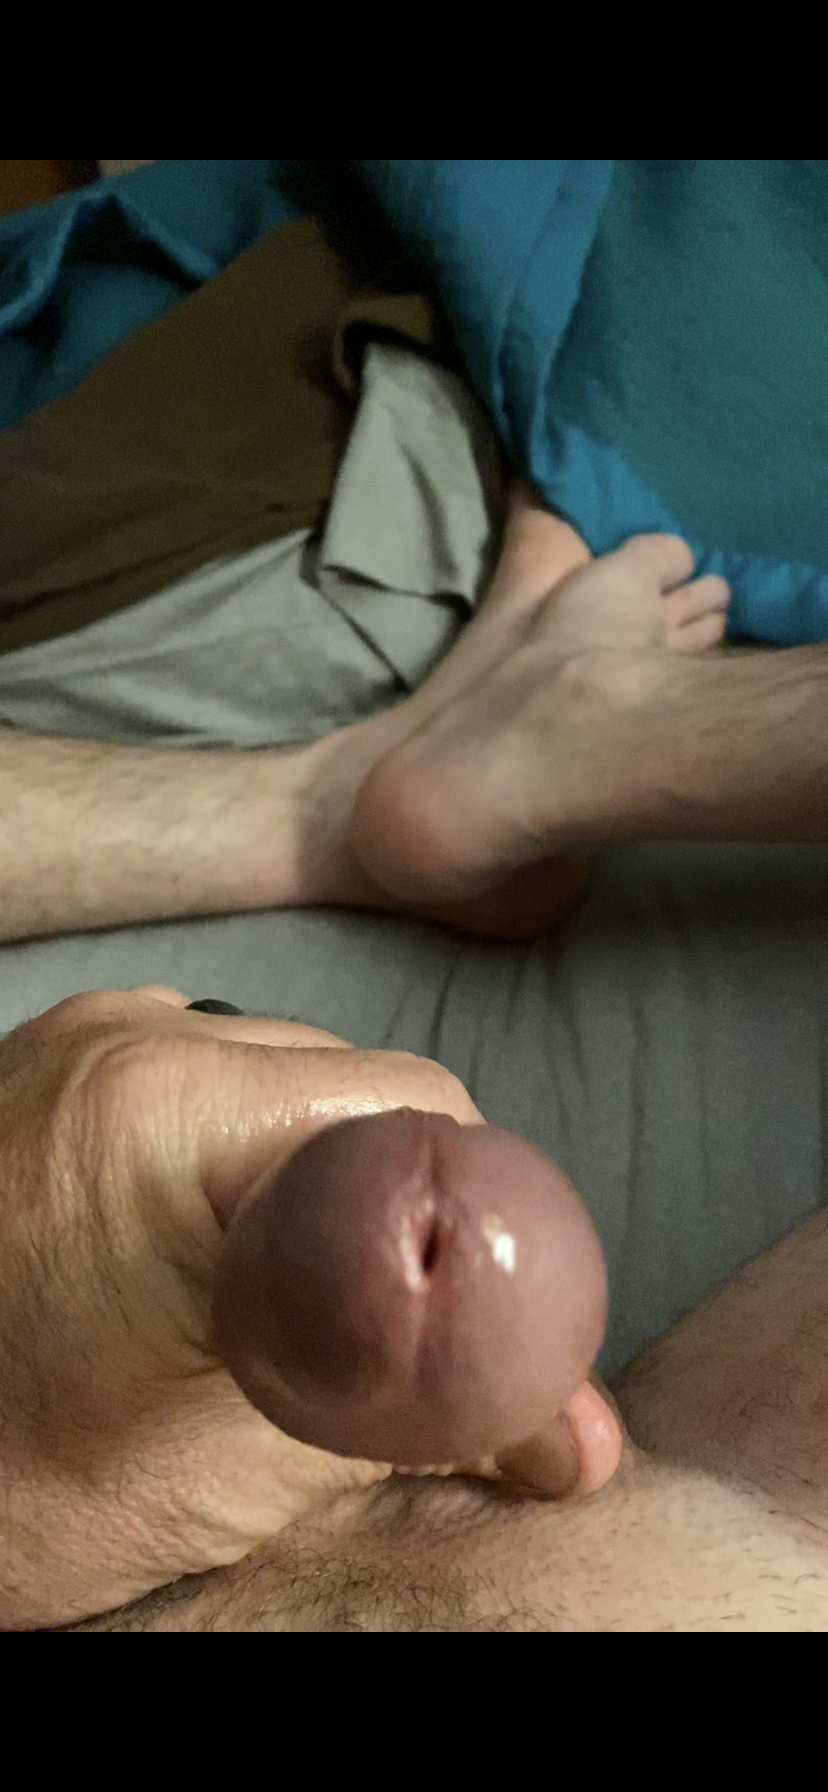 Watch the Photo by Medcitystroker with the username @Medcitystroker, who is a verified user, posted on June 4, 2020 and the text says 'work bate!'